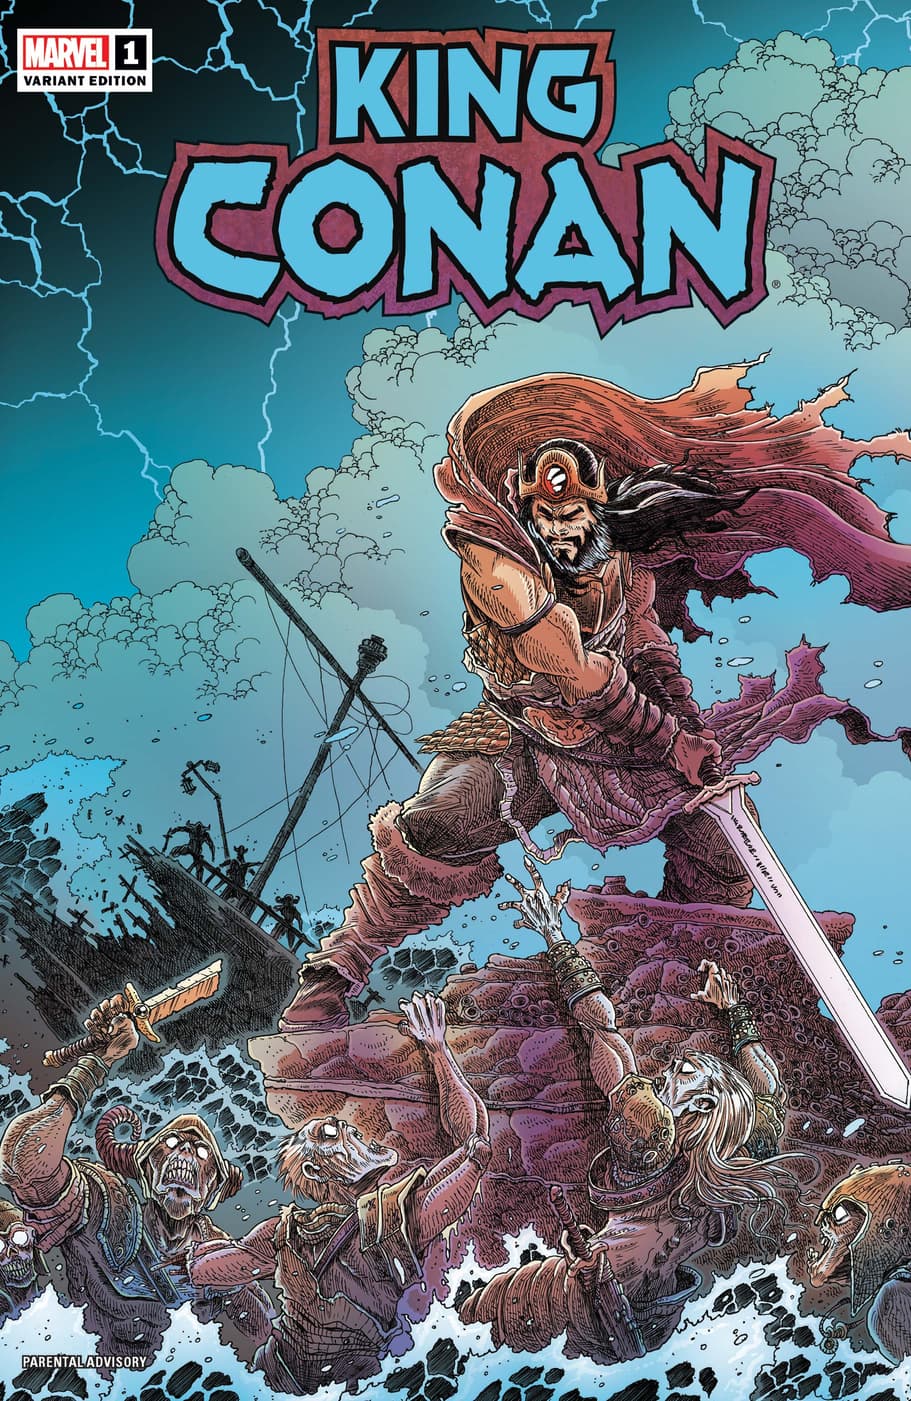 KING CONAN #1 variant cover by James Stokoe